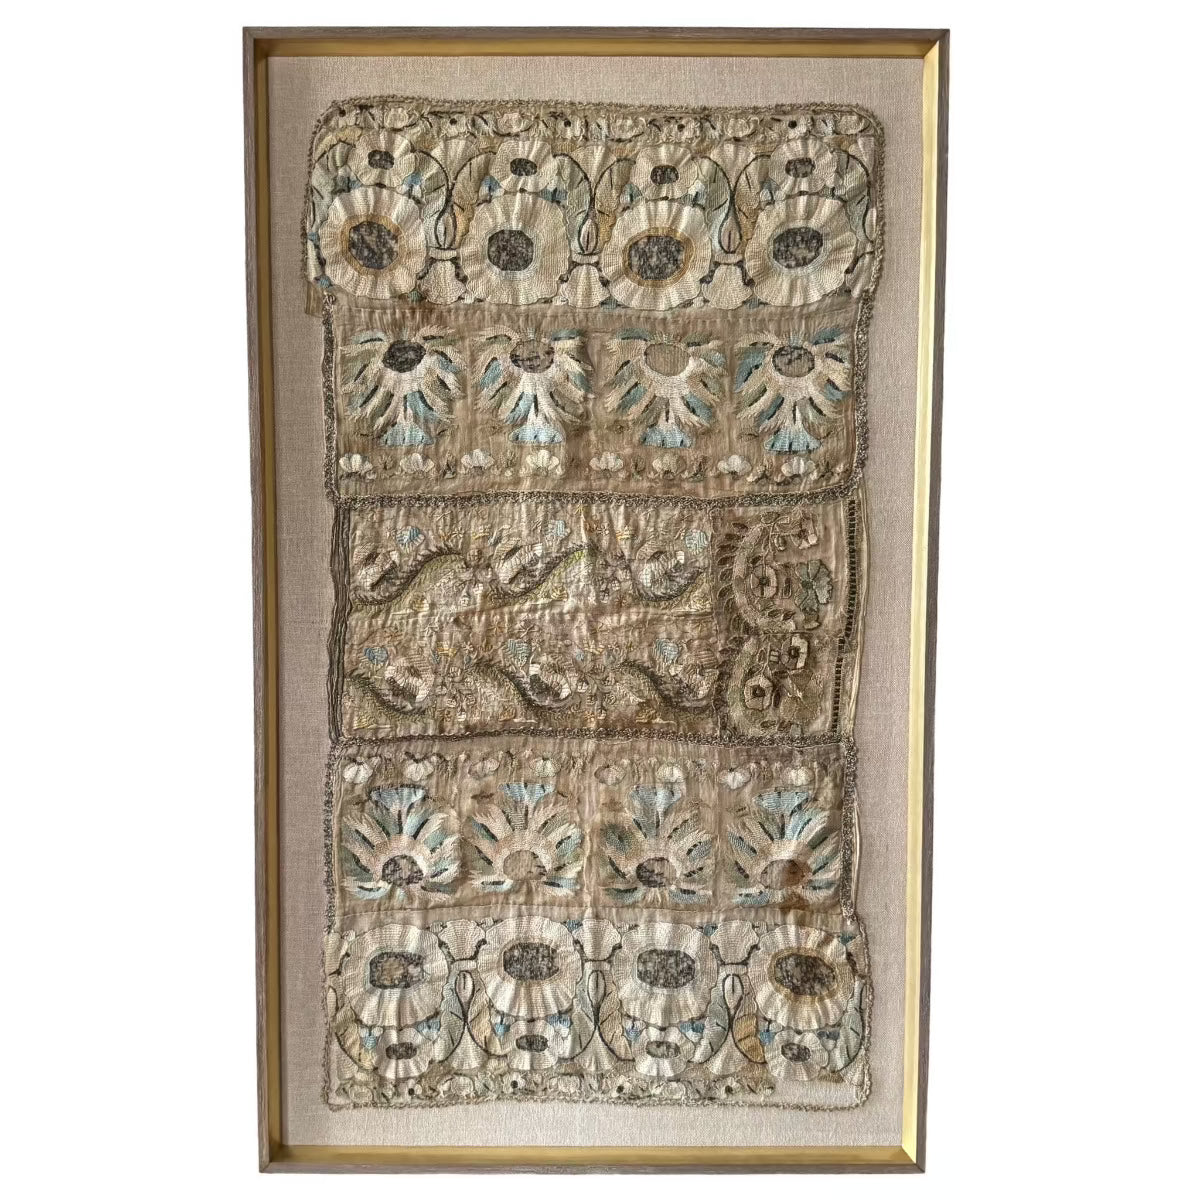 Framed 18th Century Muslin Hand Embroidered Ottoman Towels (430423) Antique Textile Rebecca Vizard 